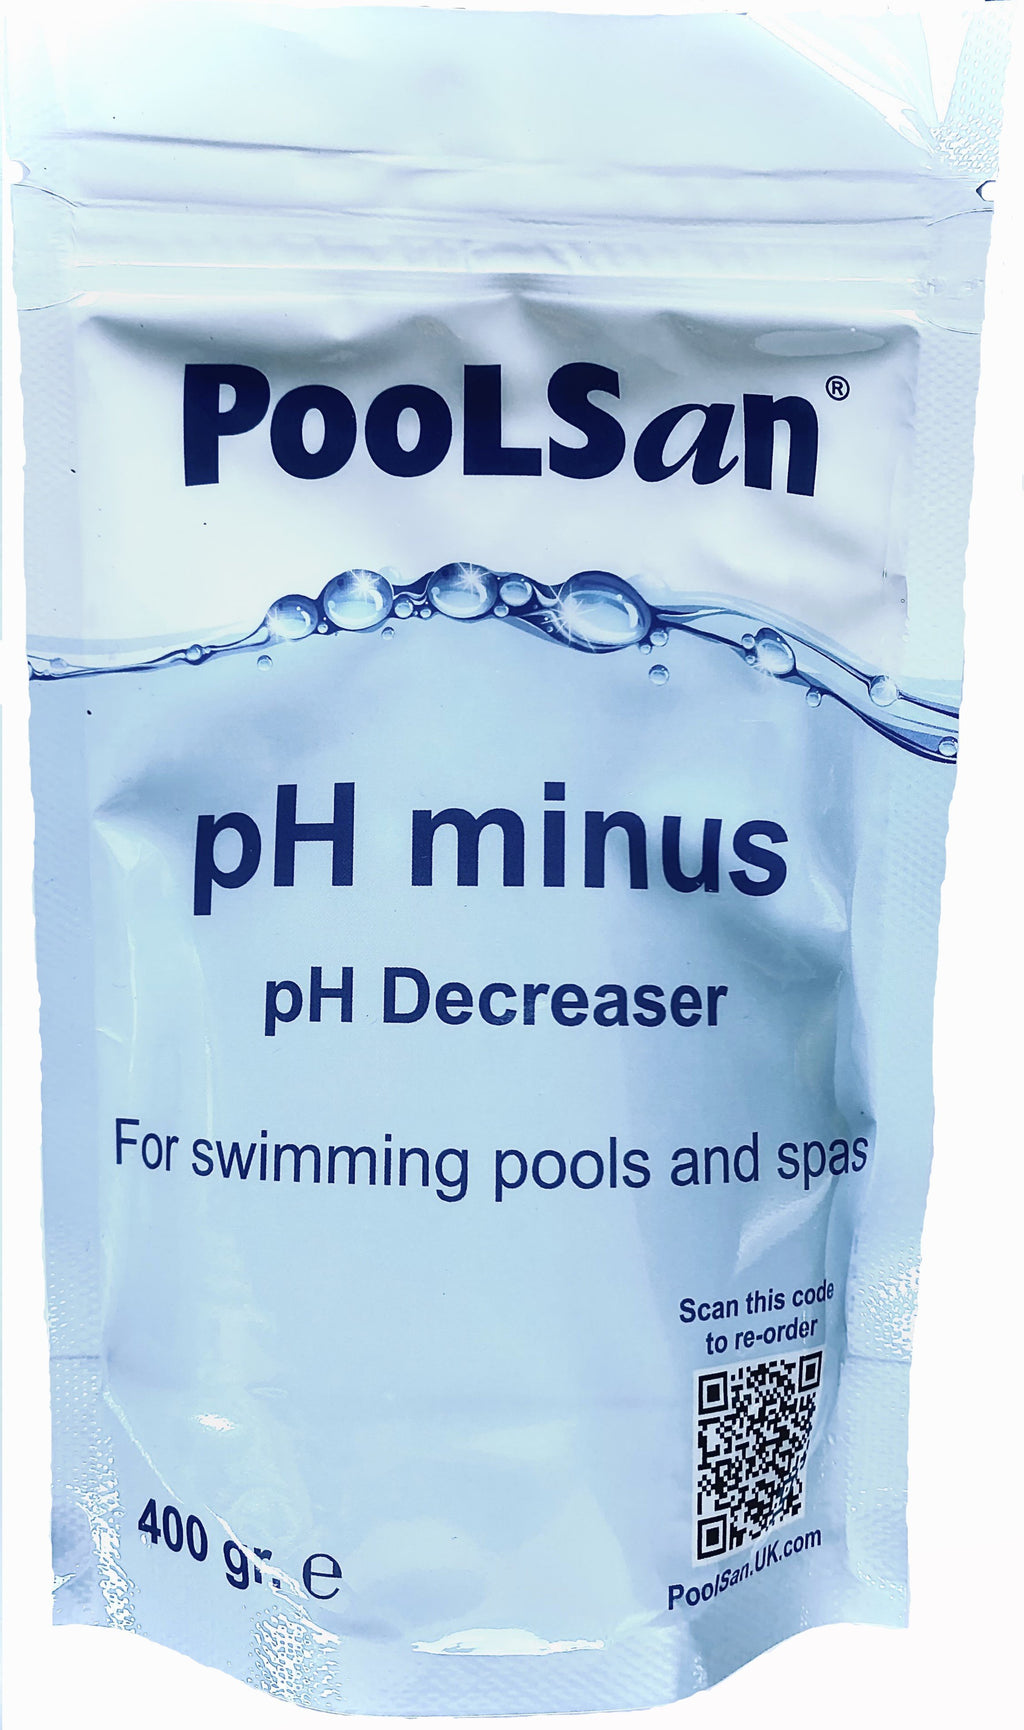 PoolSan pH Minus pH reducer and alkalinity reducer 400gr for pools & hot tubs - PoolSan Official UK Site